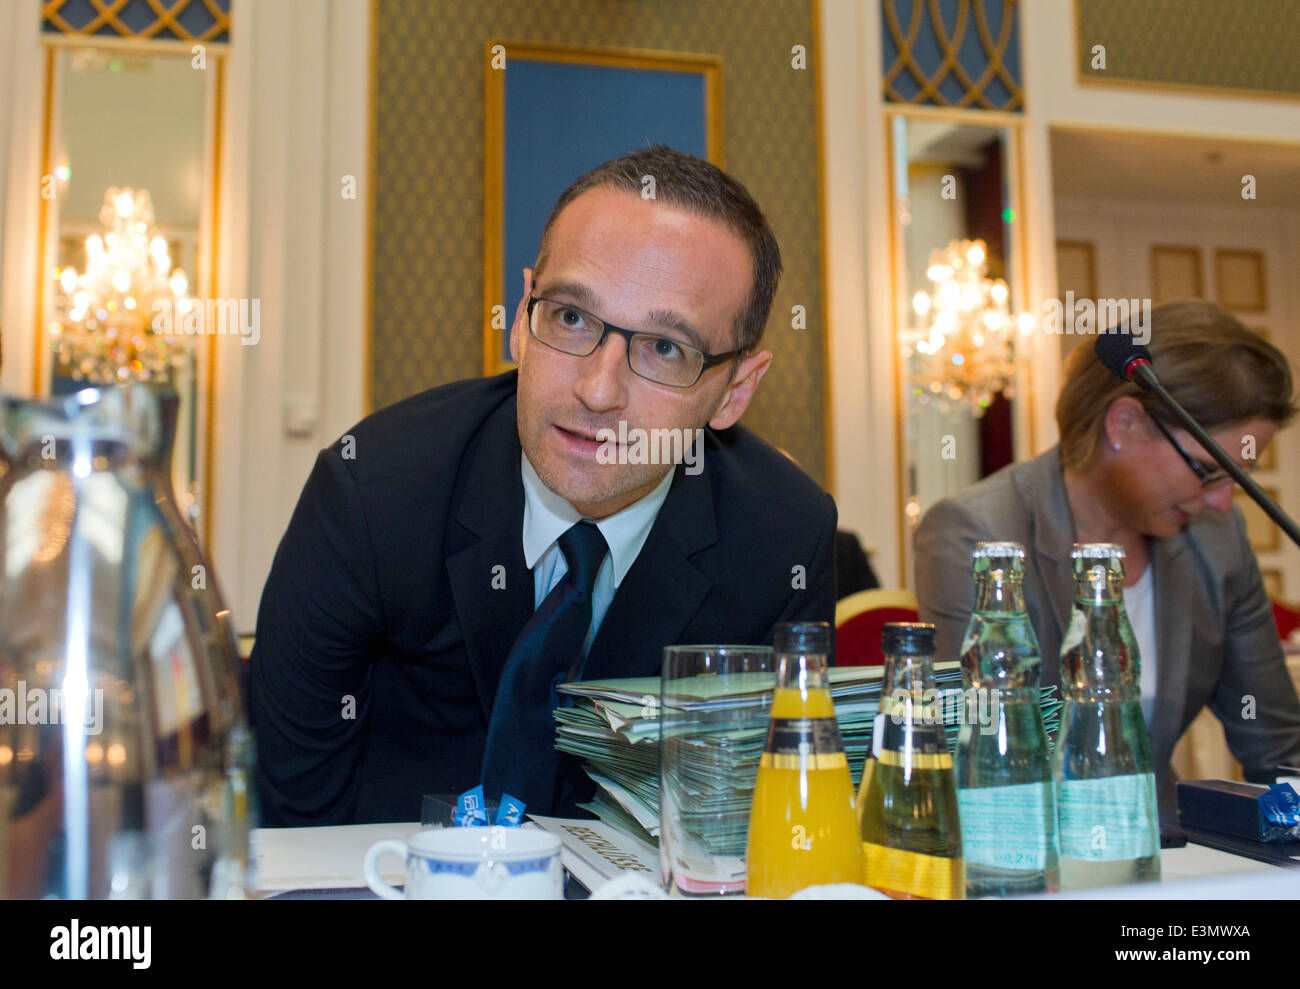 German minister of justice and consumer protection Heiko Maas (SPD) attends the beginning of the 85th conference of ministers of justice in Binz on the Island of Ruegen, Germany, 25 June 2014. Limperg was appointed as president on 11 June by the German cabinet. The two day conference focusses on improvement of the protection of victimes and the fight against cyber bullying. Photo: Jens Buettner/dpa Stock Photo